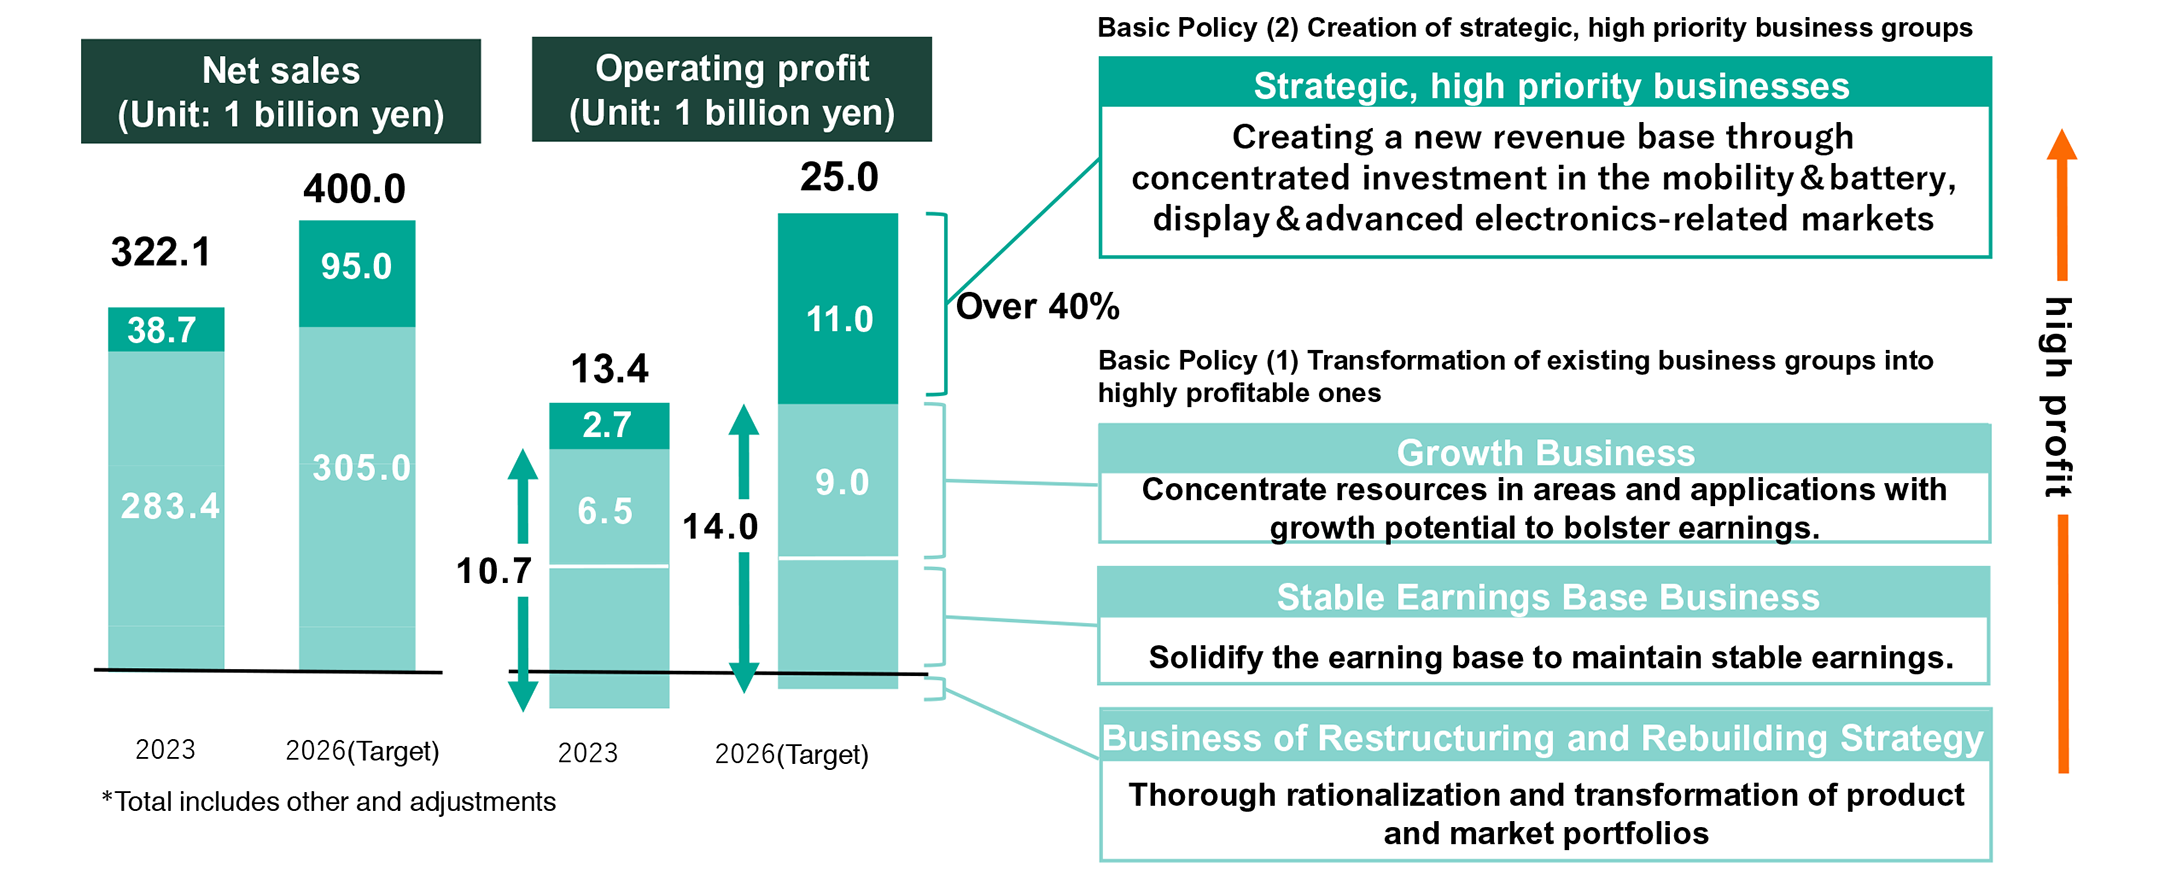 Business portfolio transformation with basic policy 1 &amp; 2